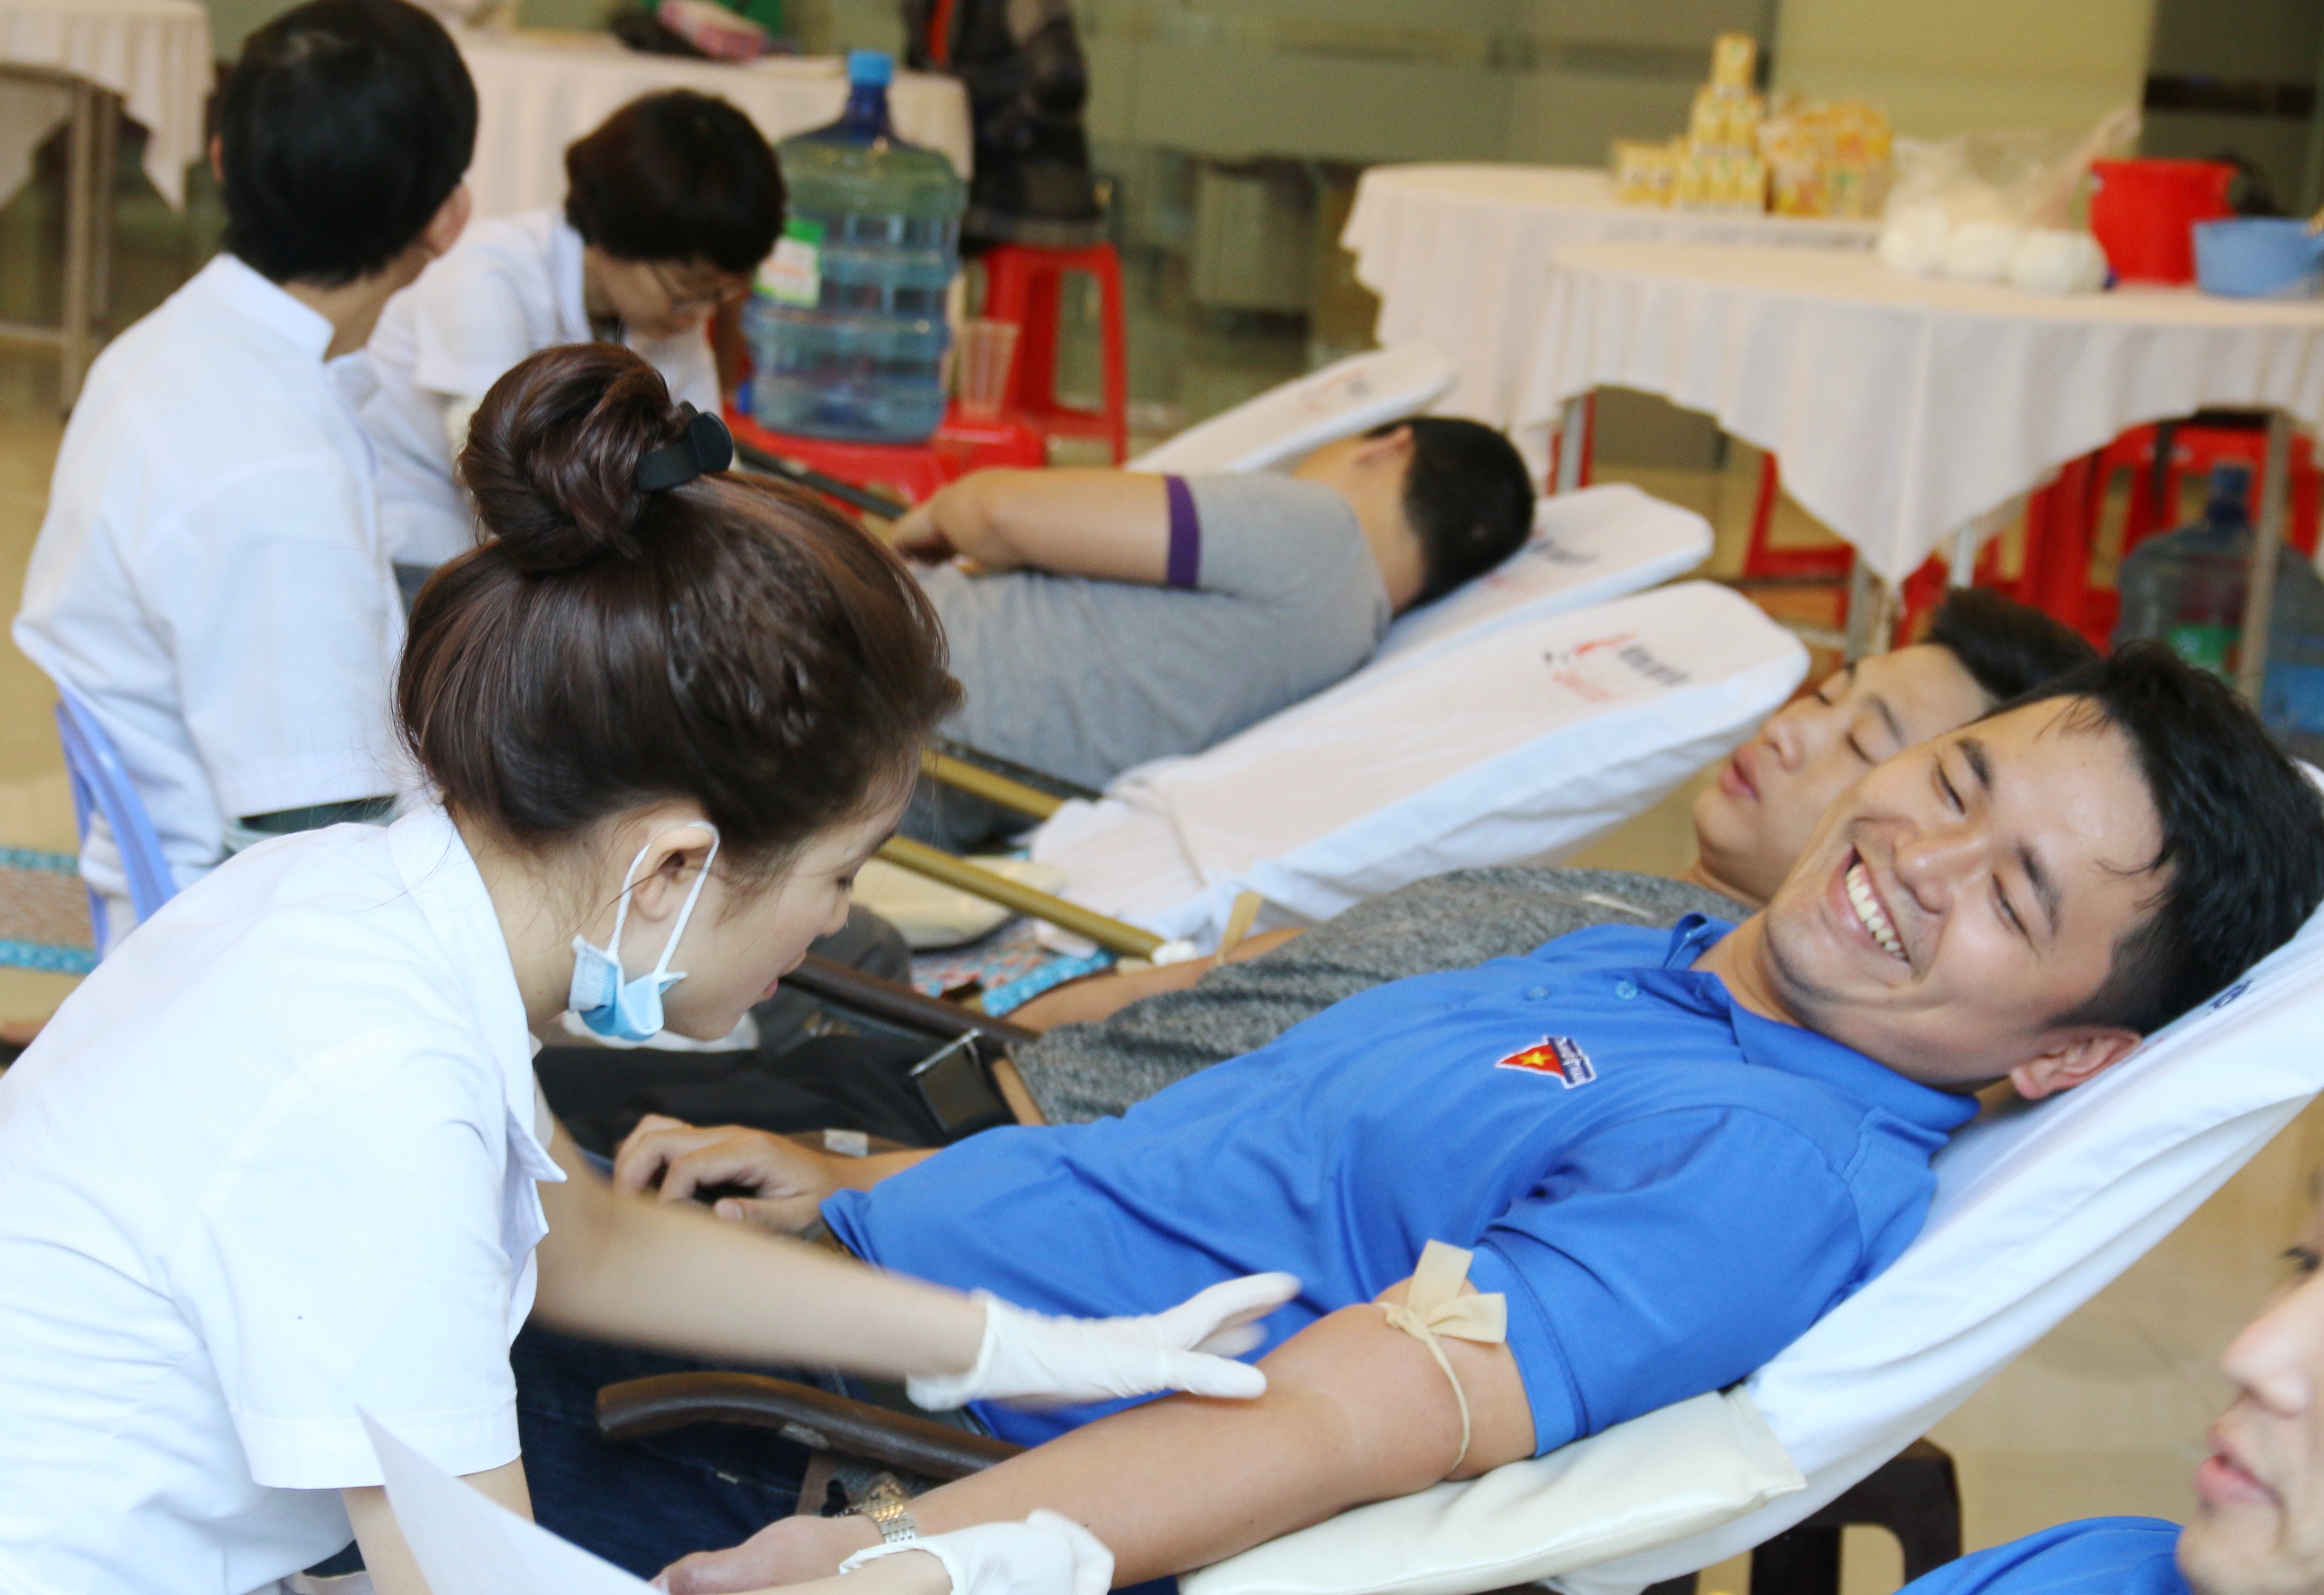 A volunteer keeping smile during the voluntary blood donation process